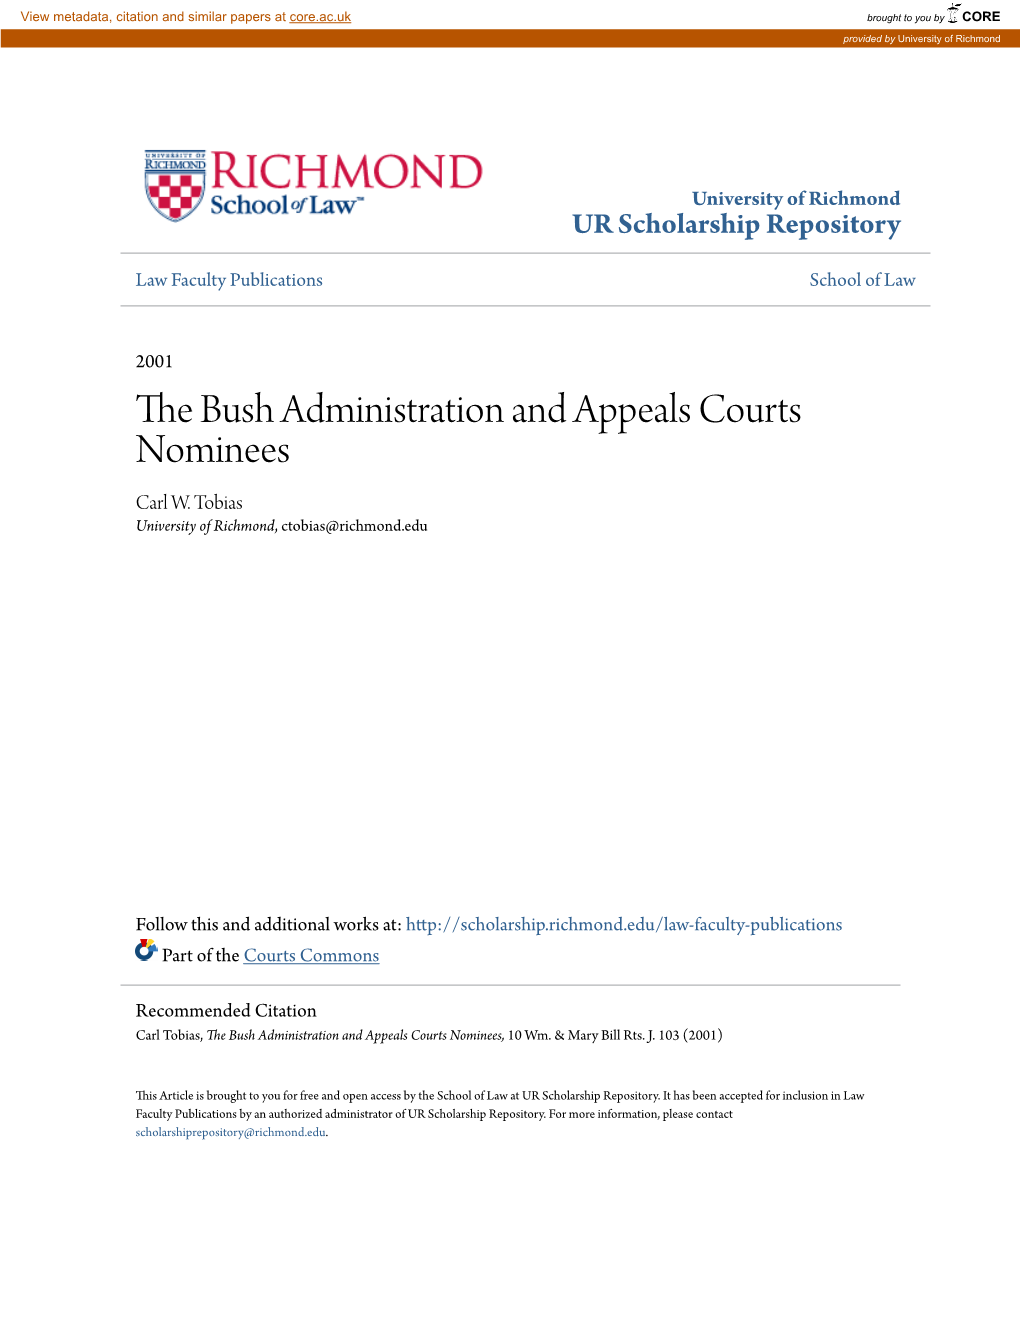 The Bush Administration and Appeals Courts Nominees, 10 Wm